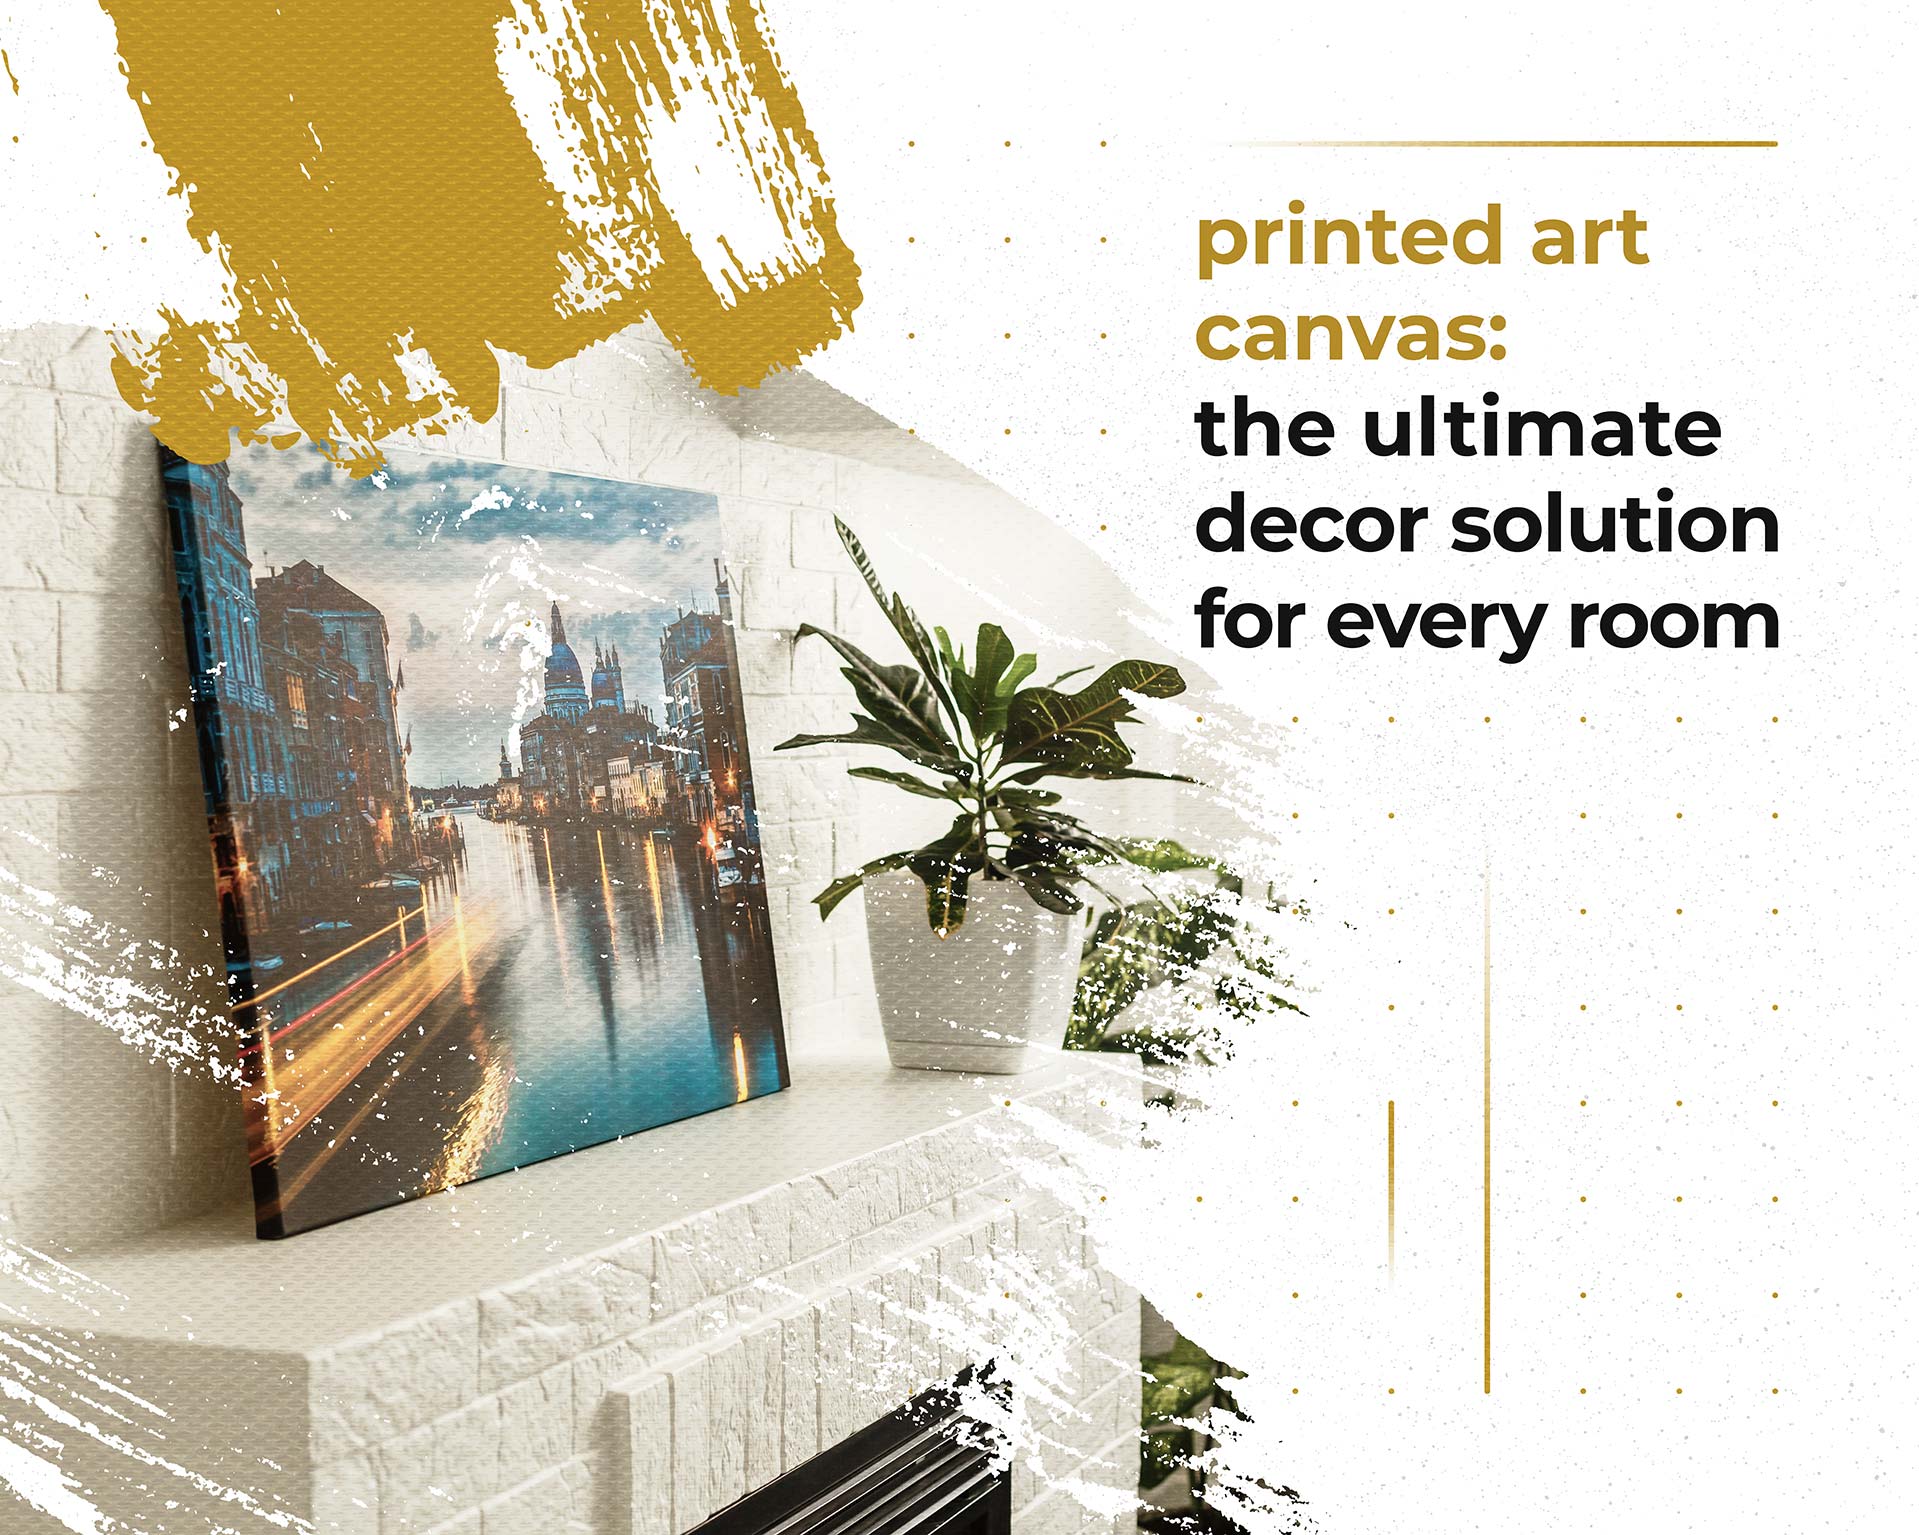 Printed Art Canvas: The Ultimate Decor Solution for Every Room